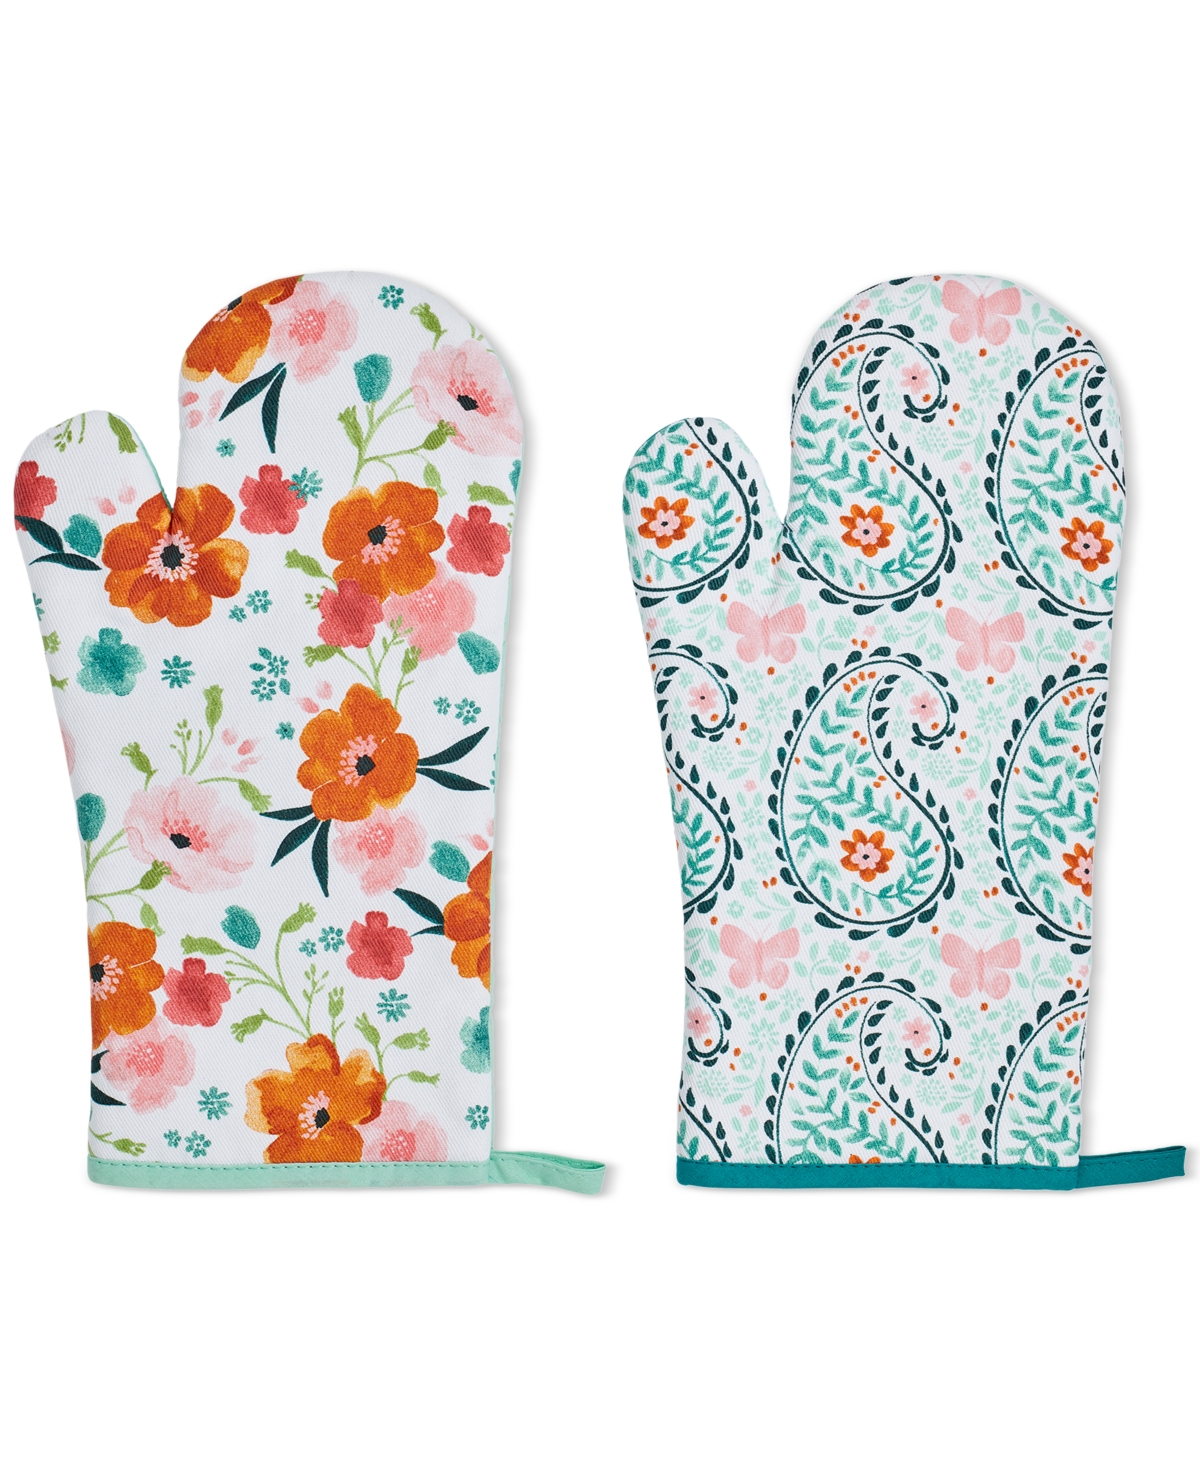 Paisley & Floral Oven Mitts, Set of 2 - Multi